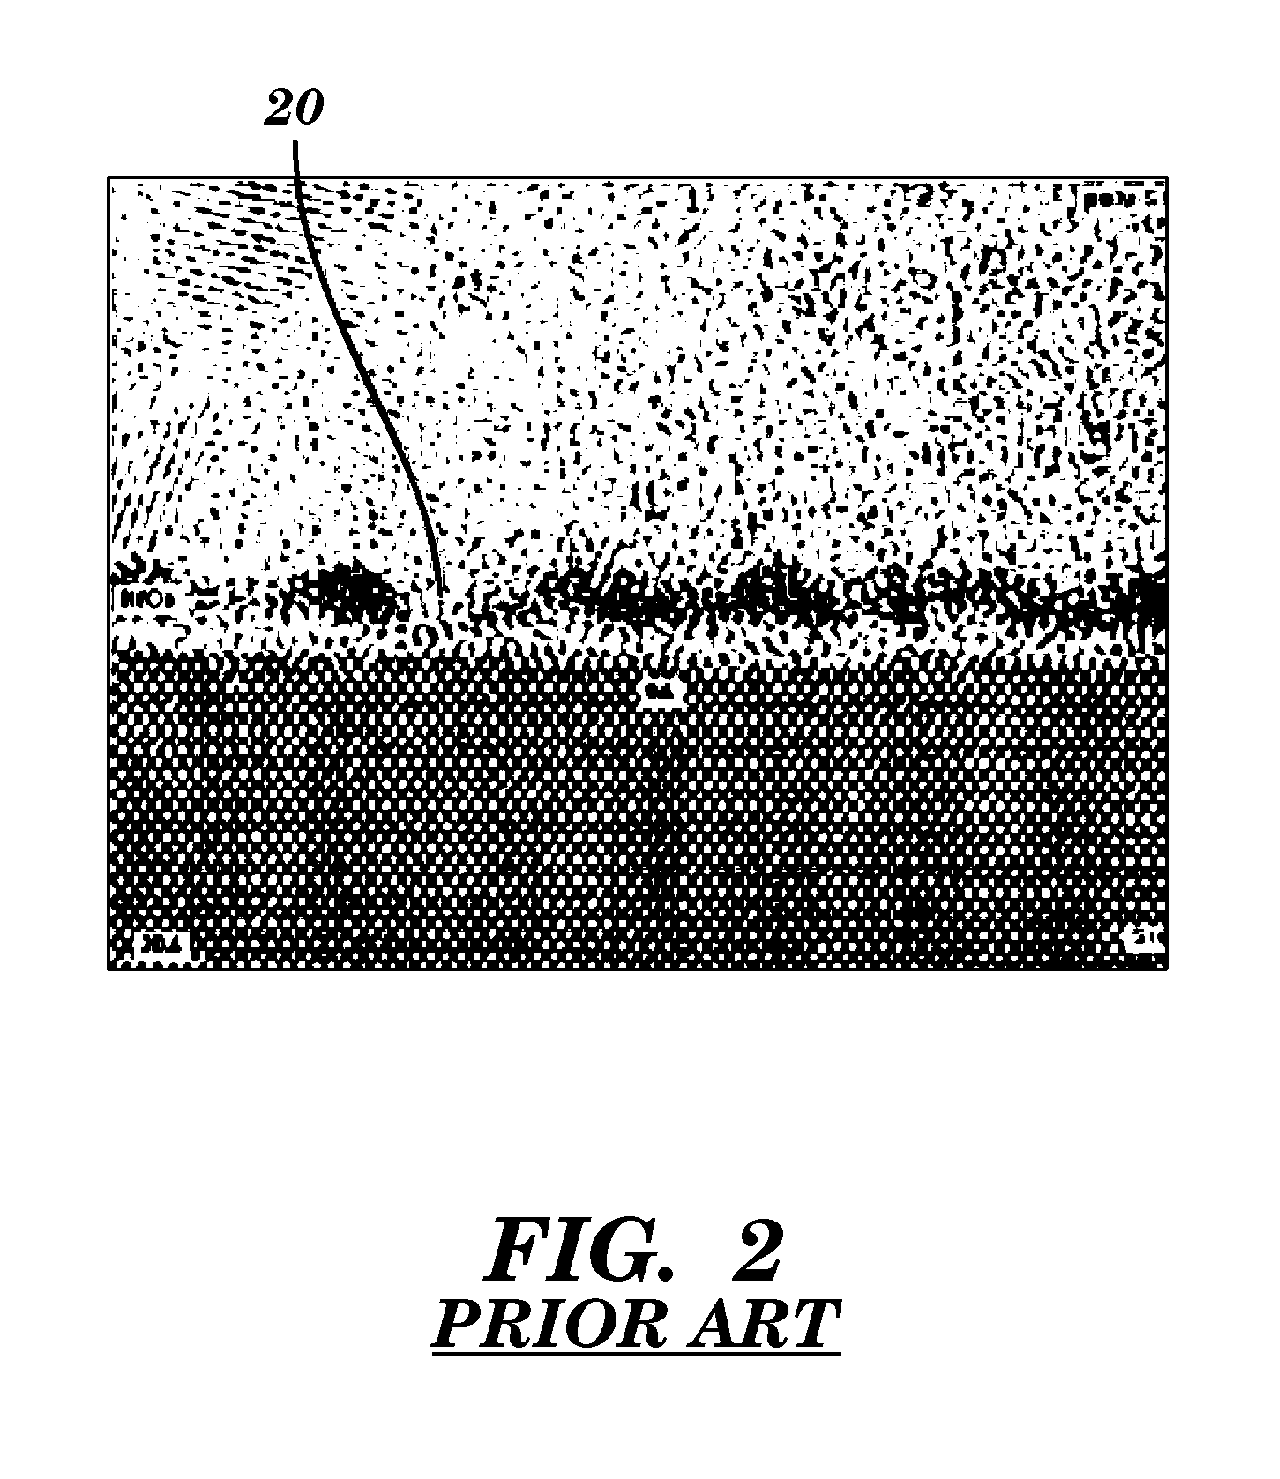 ULTRA-THIN Hf-DOPED-SILICON OXYNITRIDE FILM FOR HIGH PERFORMANCE CMOS APPLICATIONS AND METHOD OF MANUFACTURE